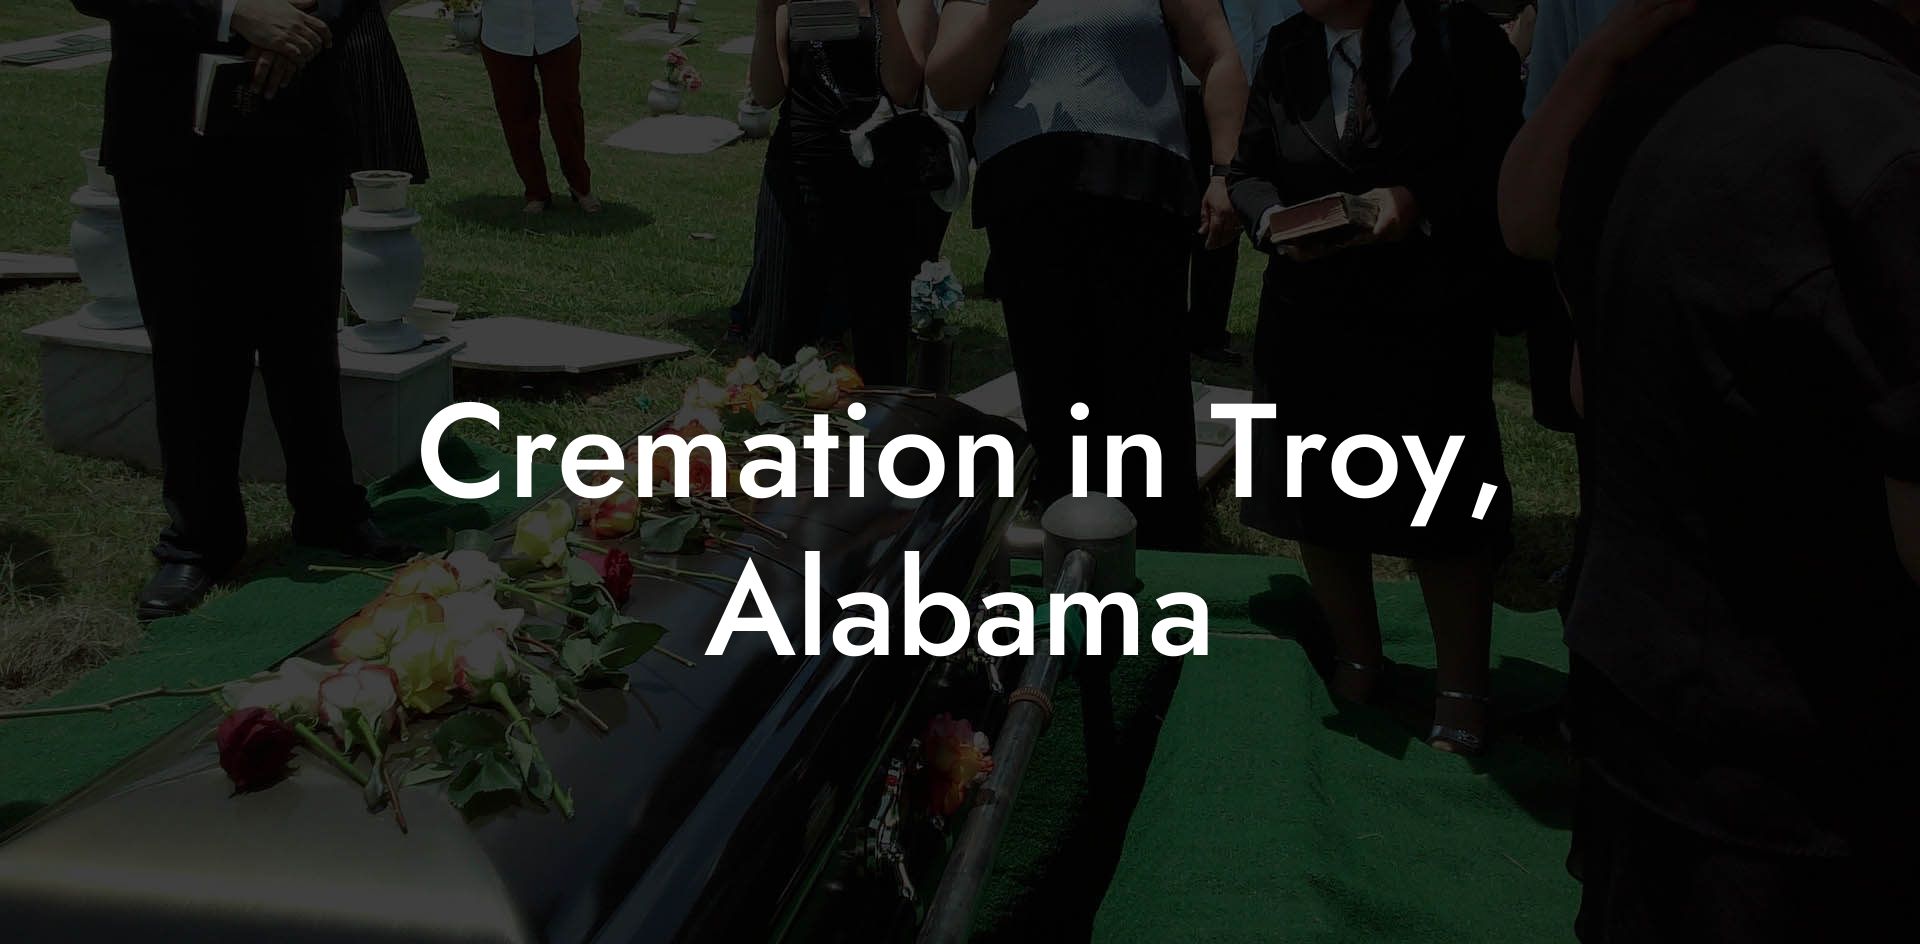 Cremation in Troy, Alabama